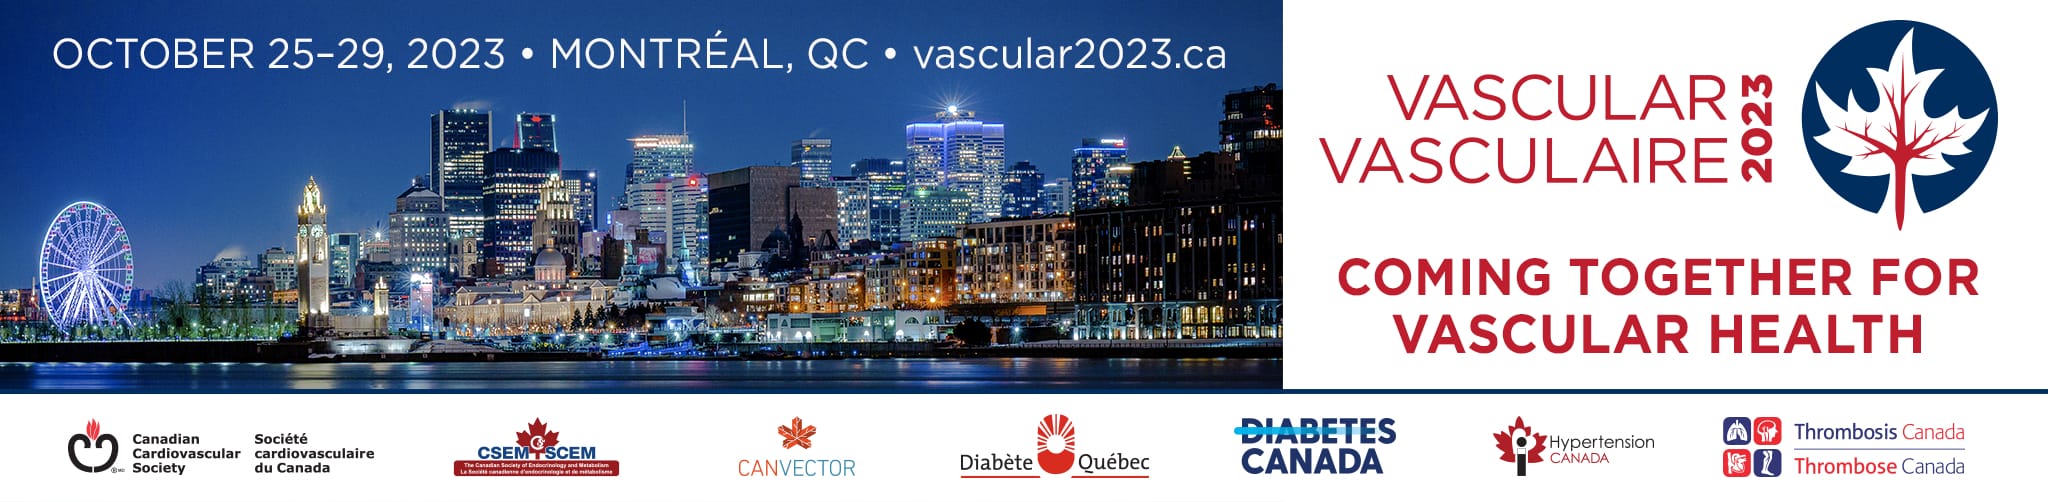 Banner for the vascular 2023 conference in montreal, showcasing the city skyline at night with event dates and sponsor logos.